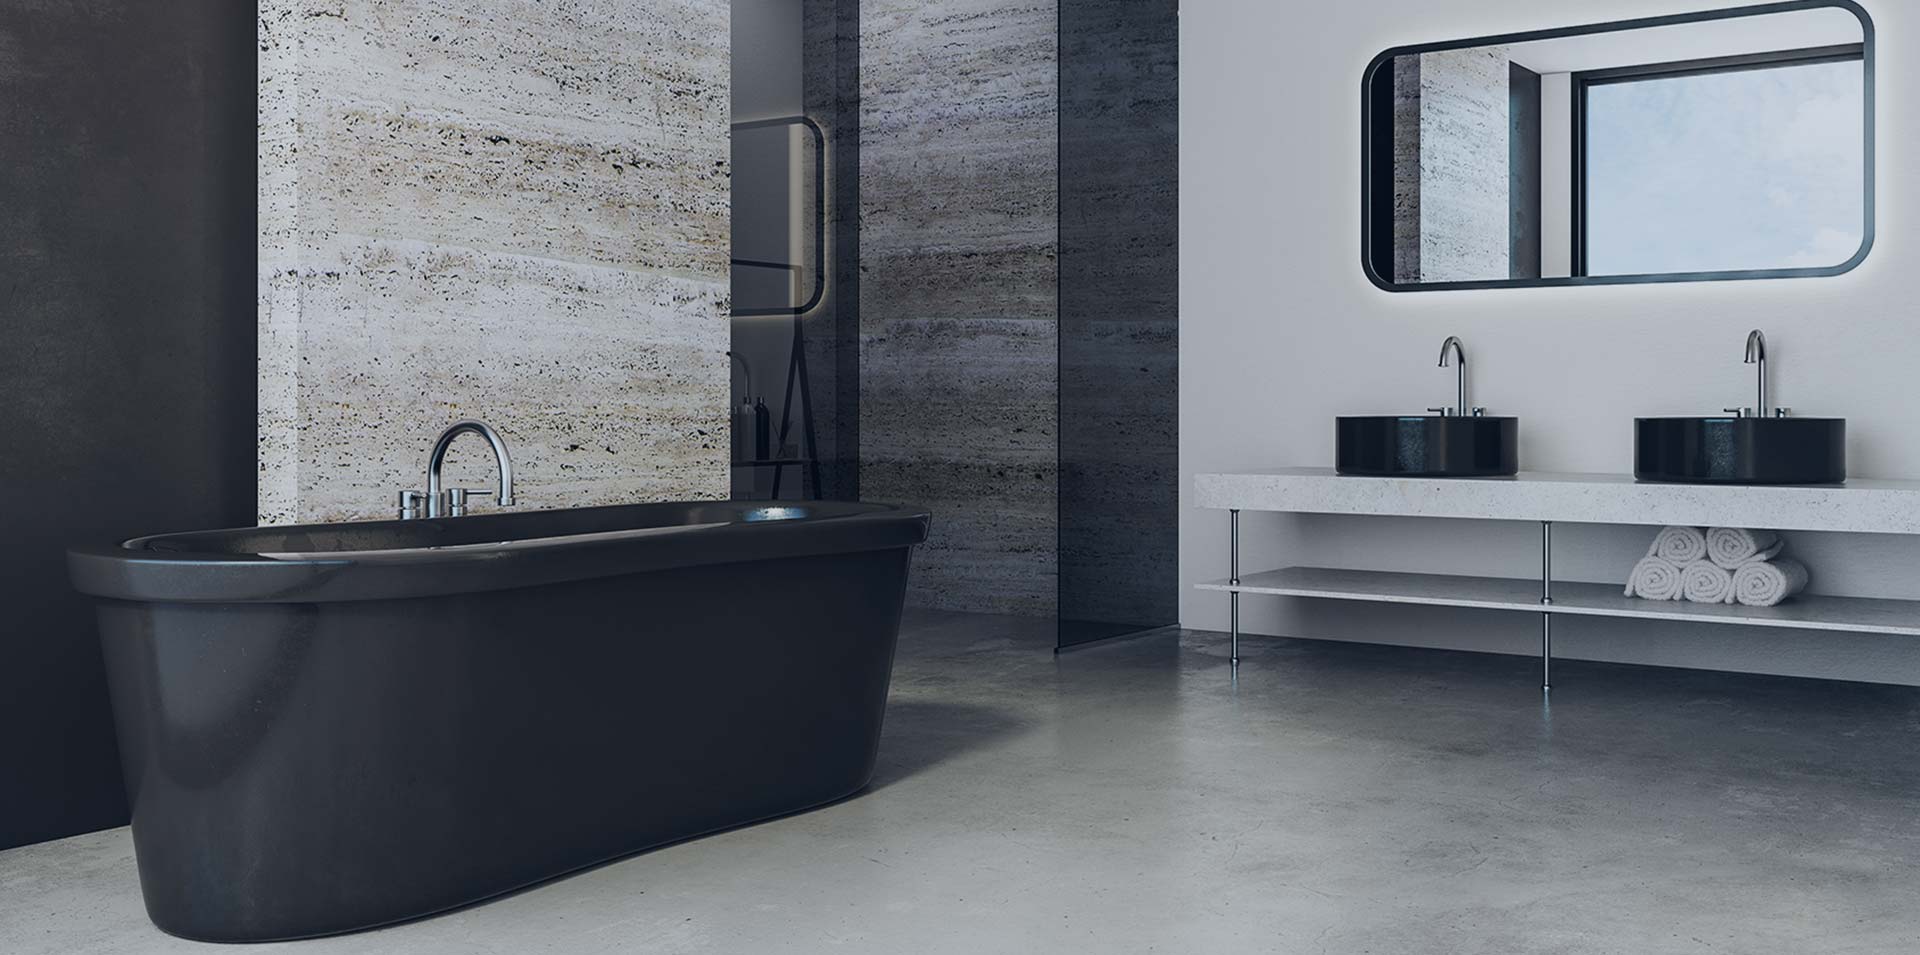 Choosing Bathroom Showrooms – Make The Right Decisions